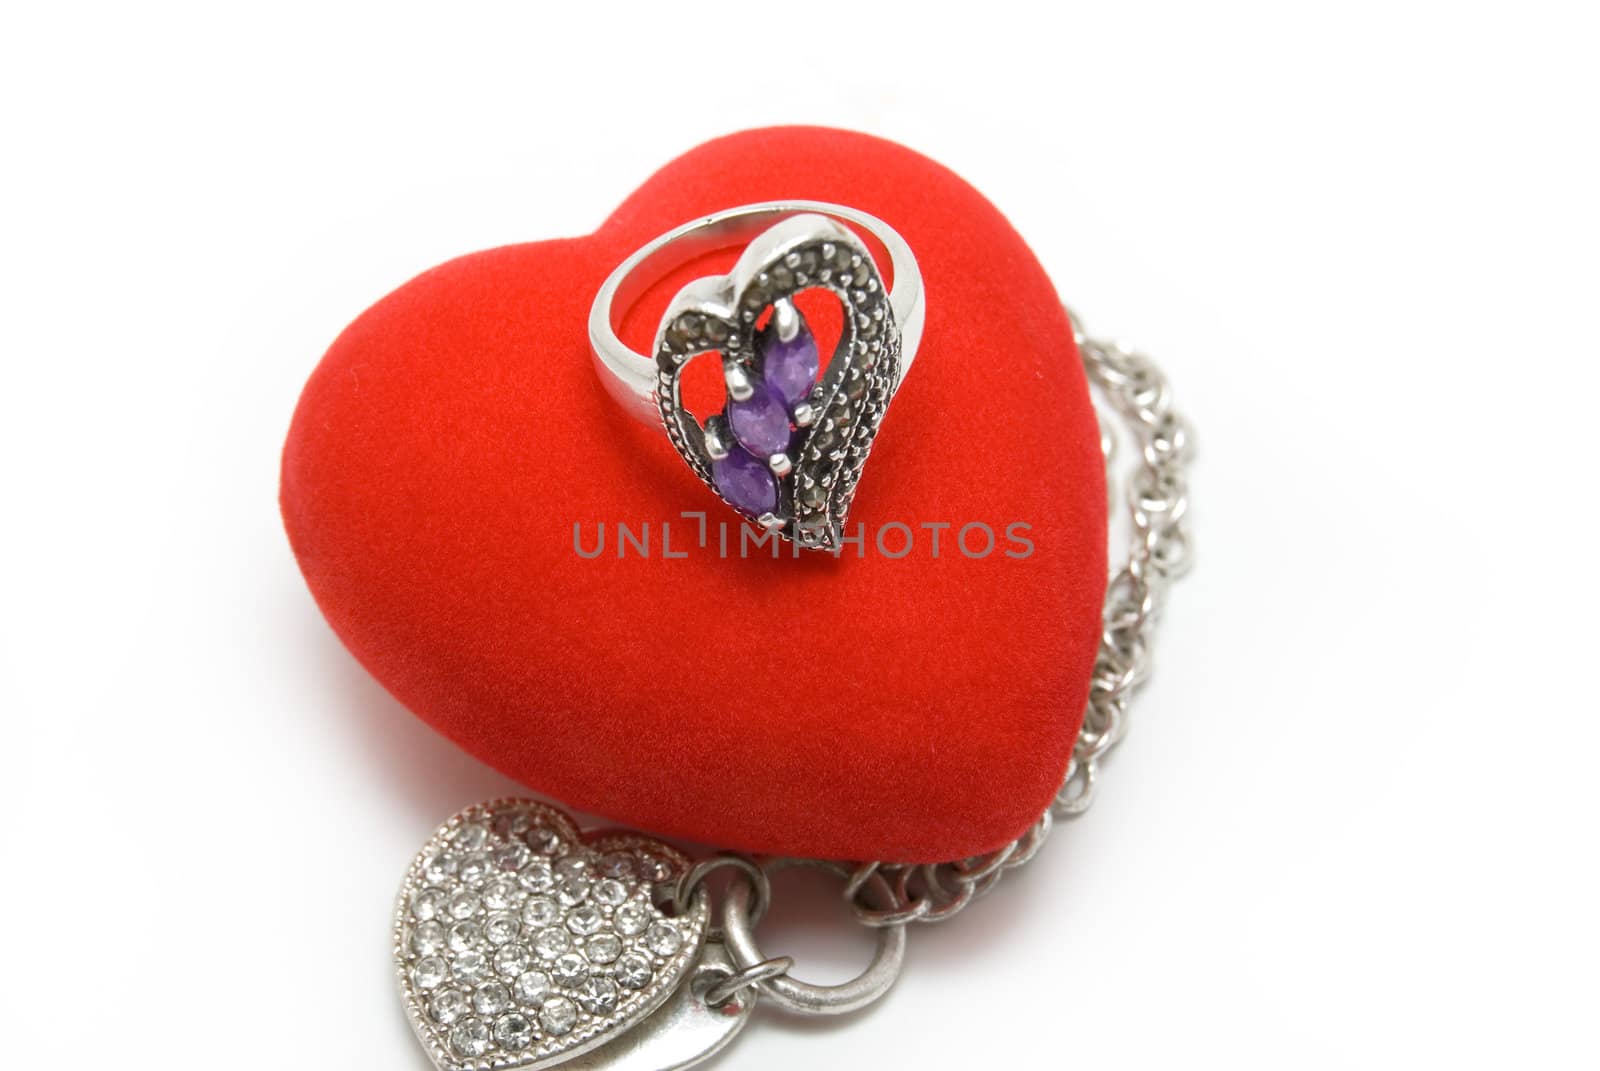 The silver ring with violet stones lays on red velvet heart
